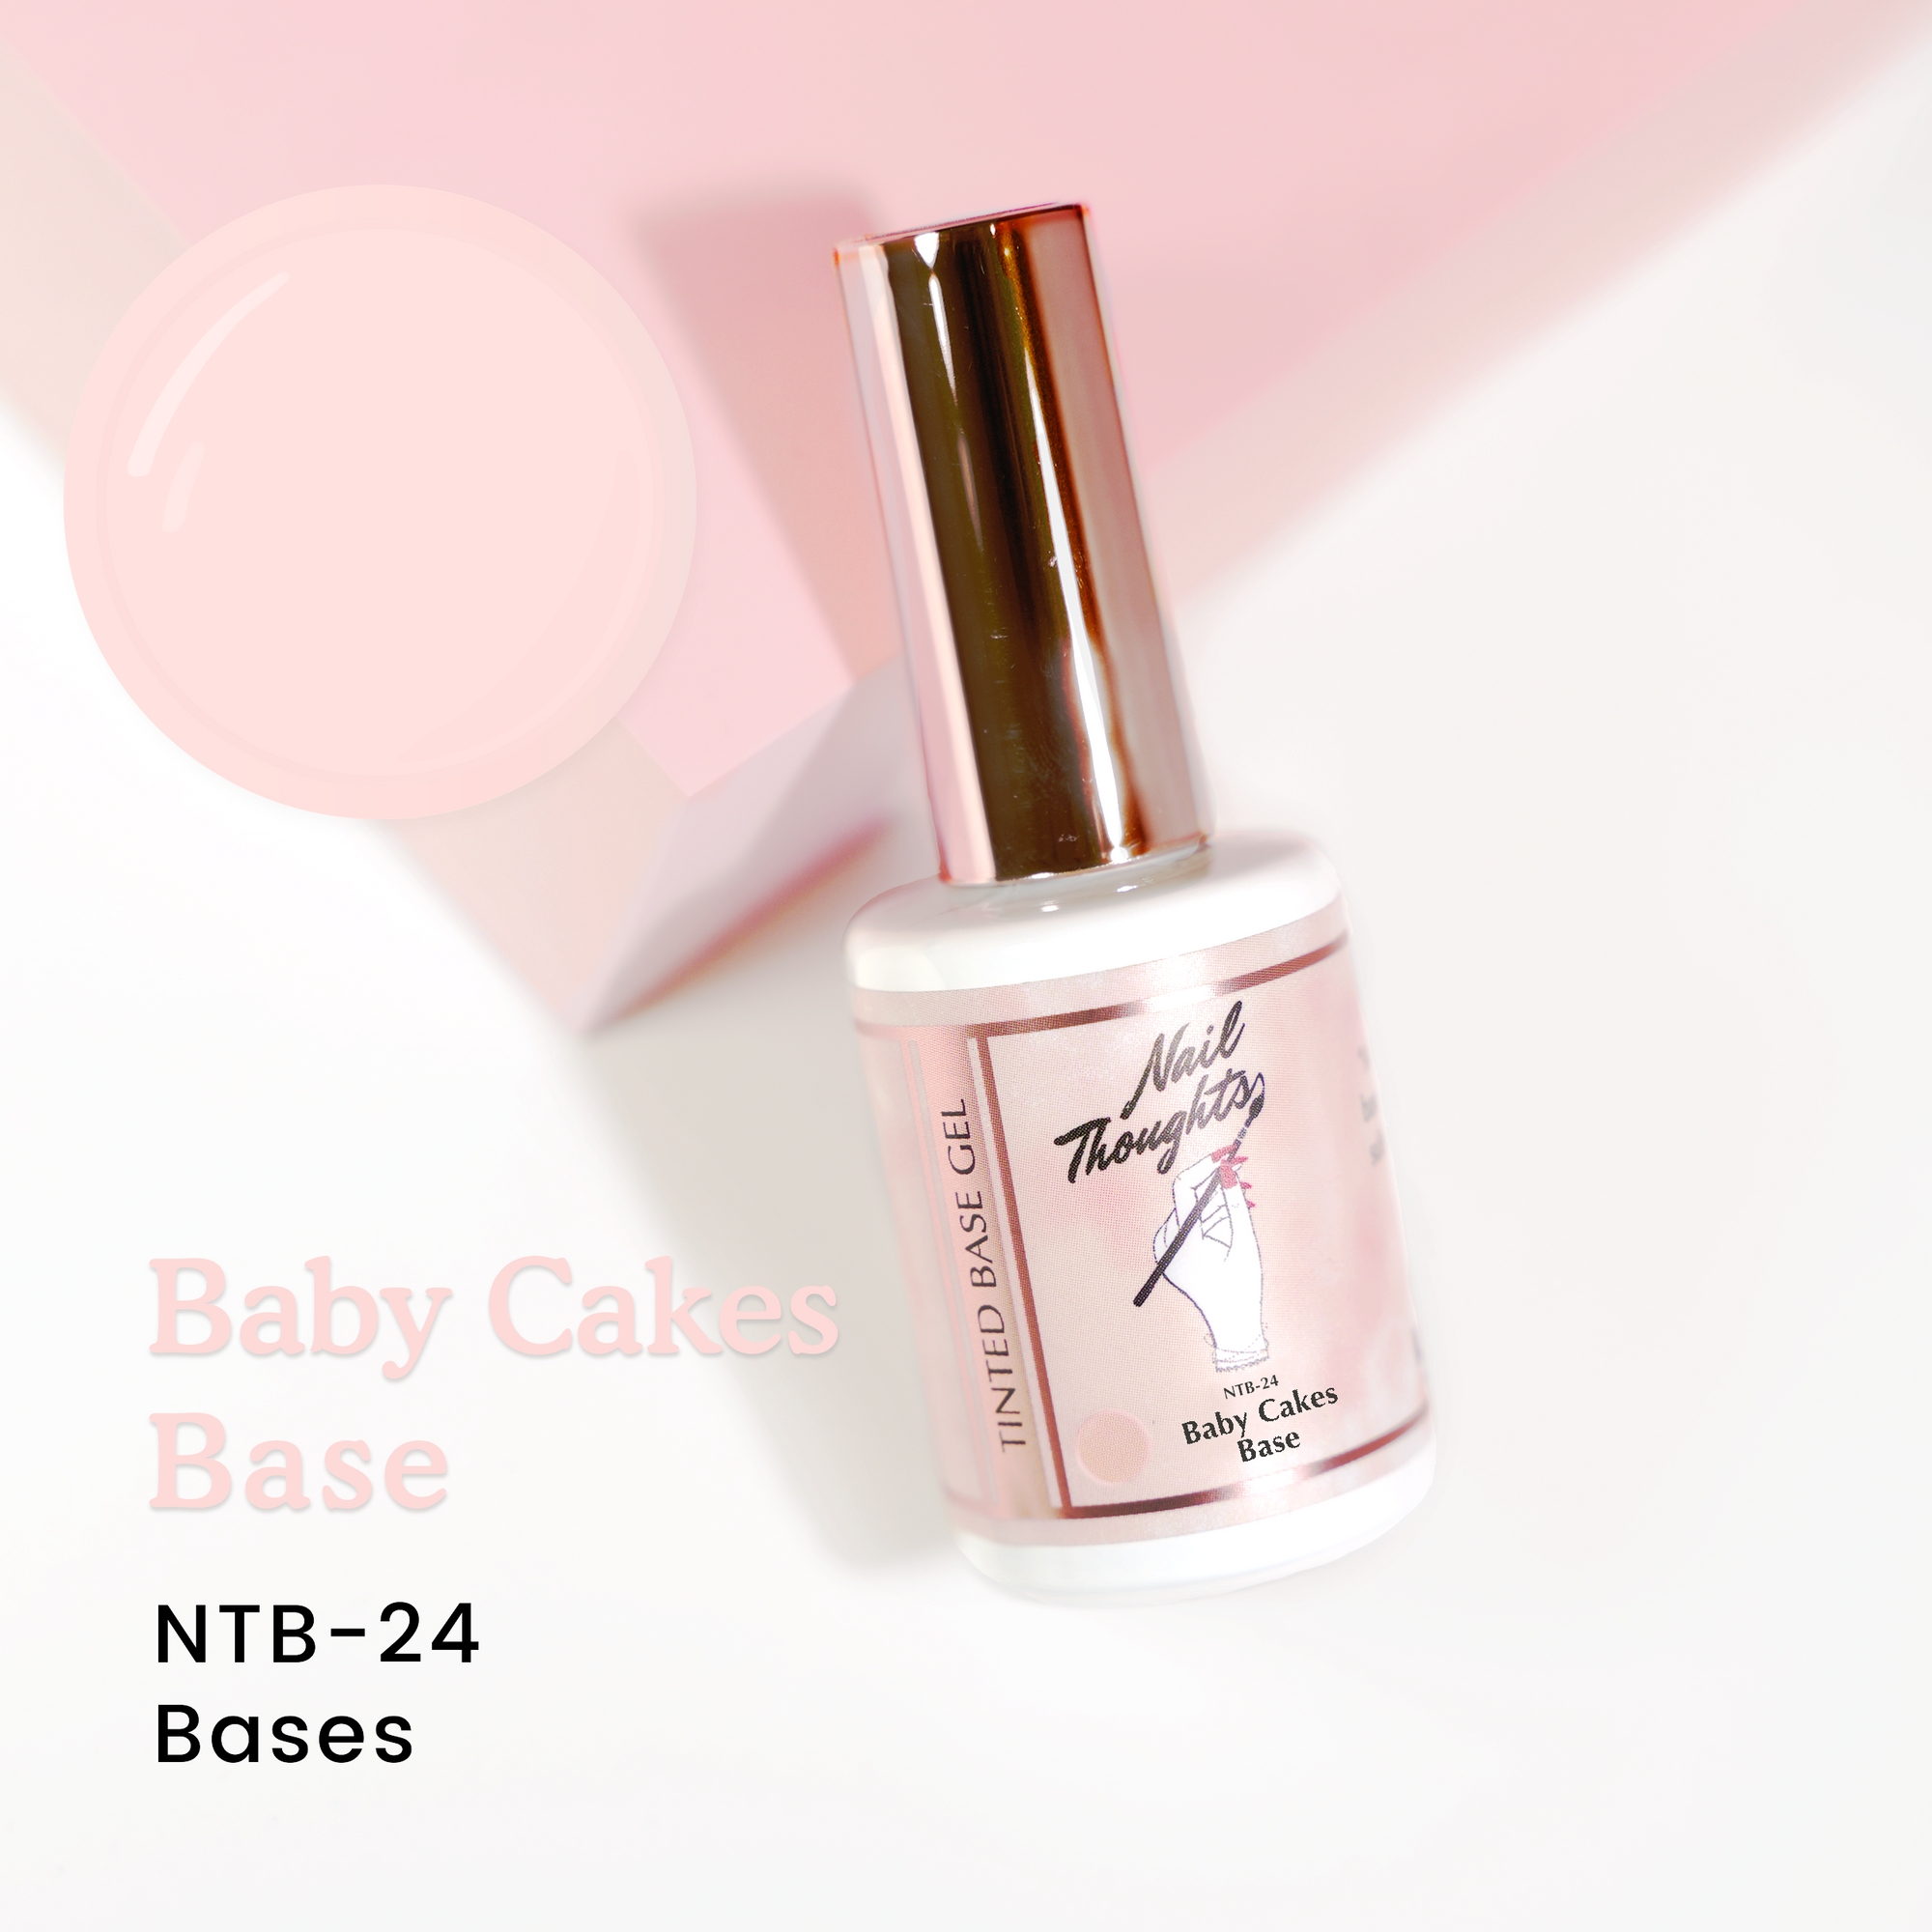 Baby Cakes NTB-24